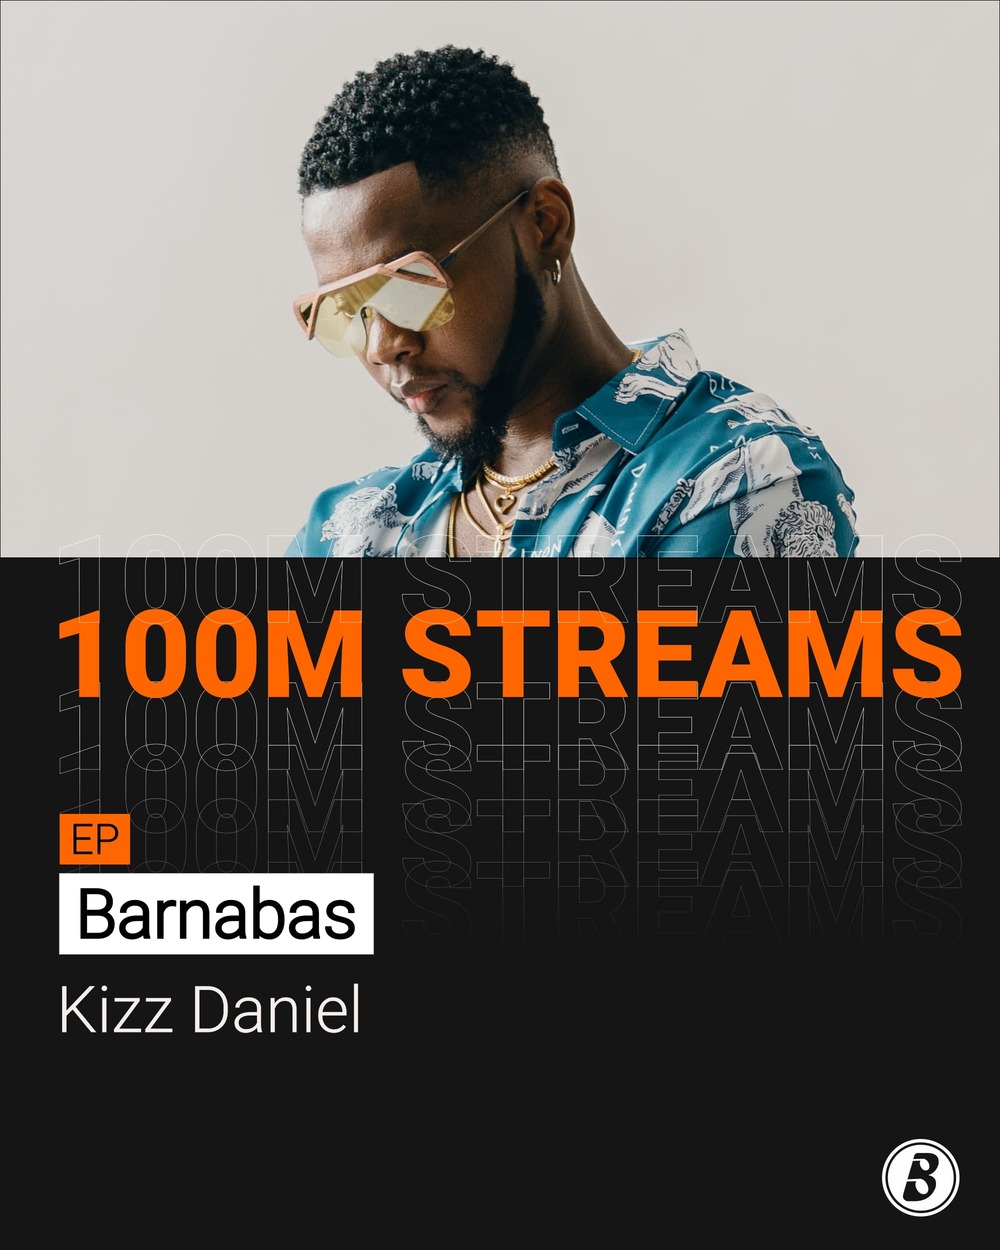 Kizz Daniel’s “Barnabas EP” Becomes First Music Project to Hit 100 million Streams on Boomplay